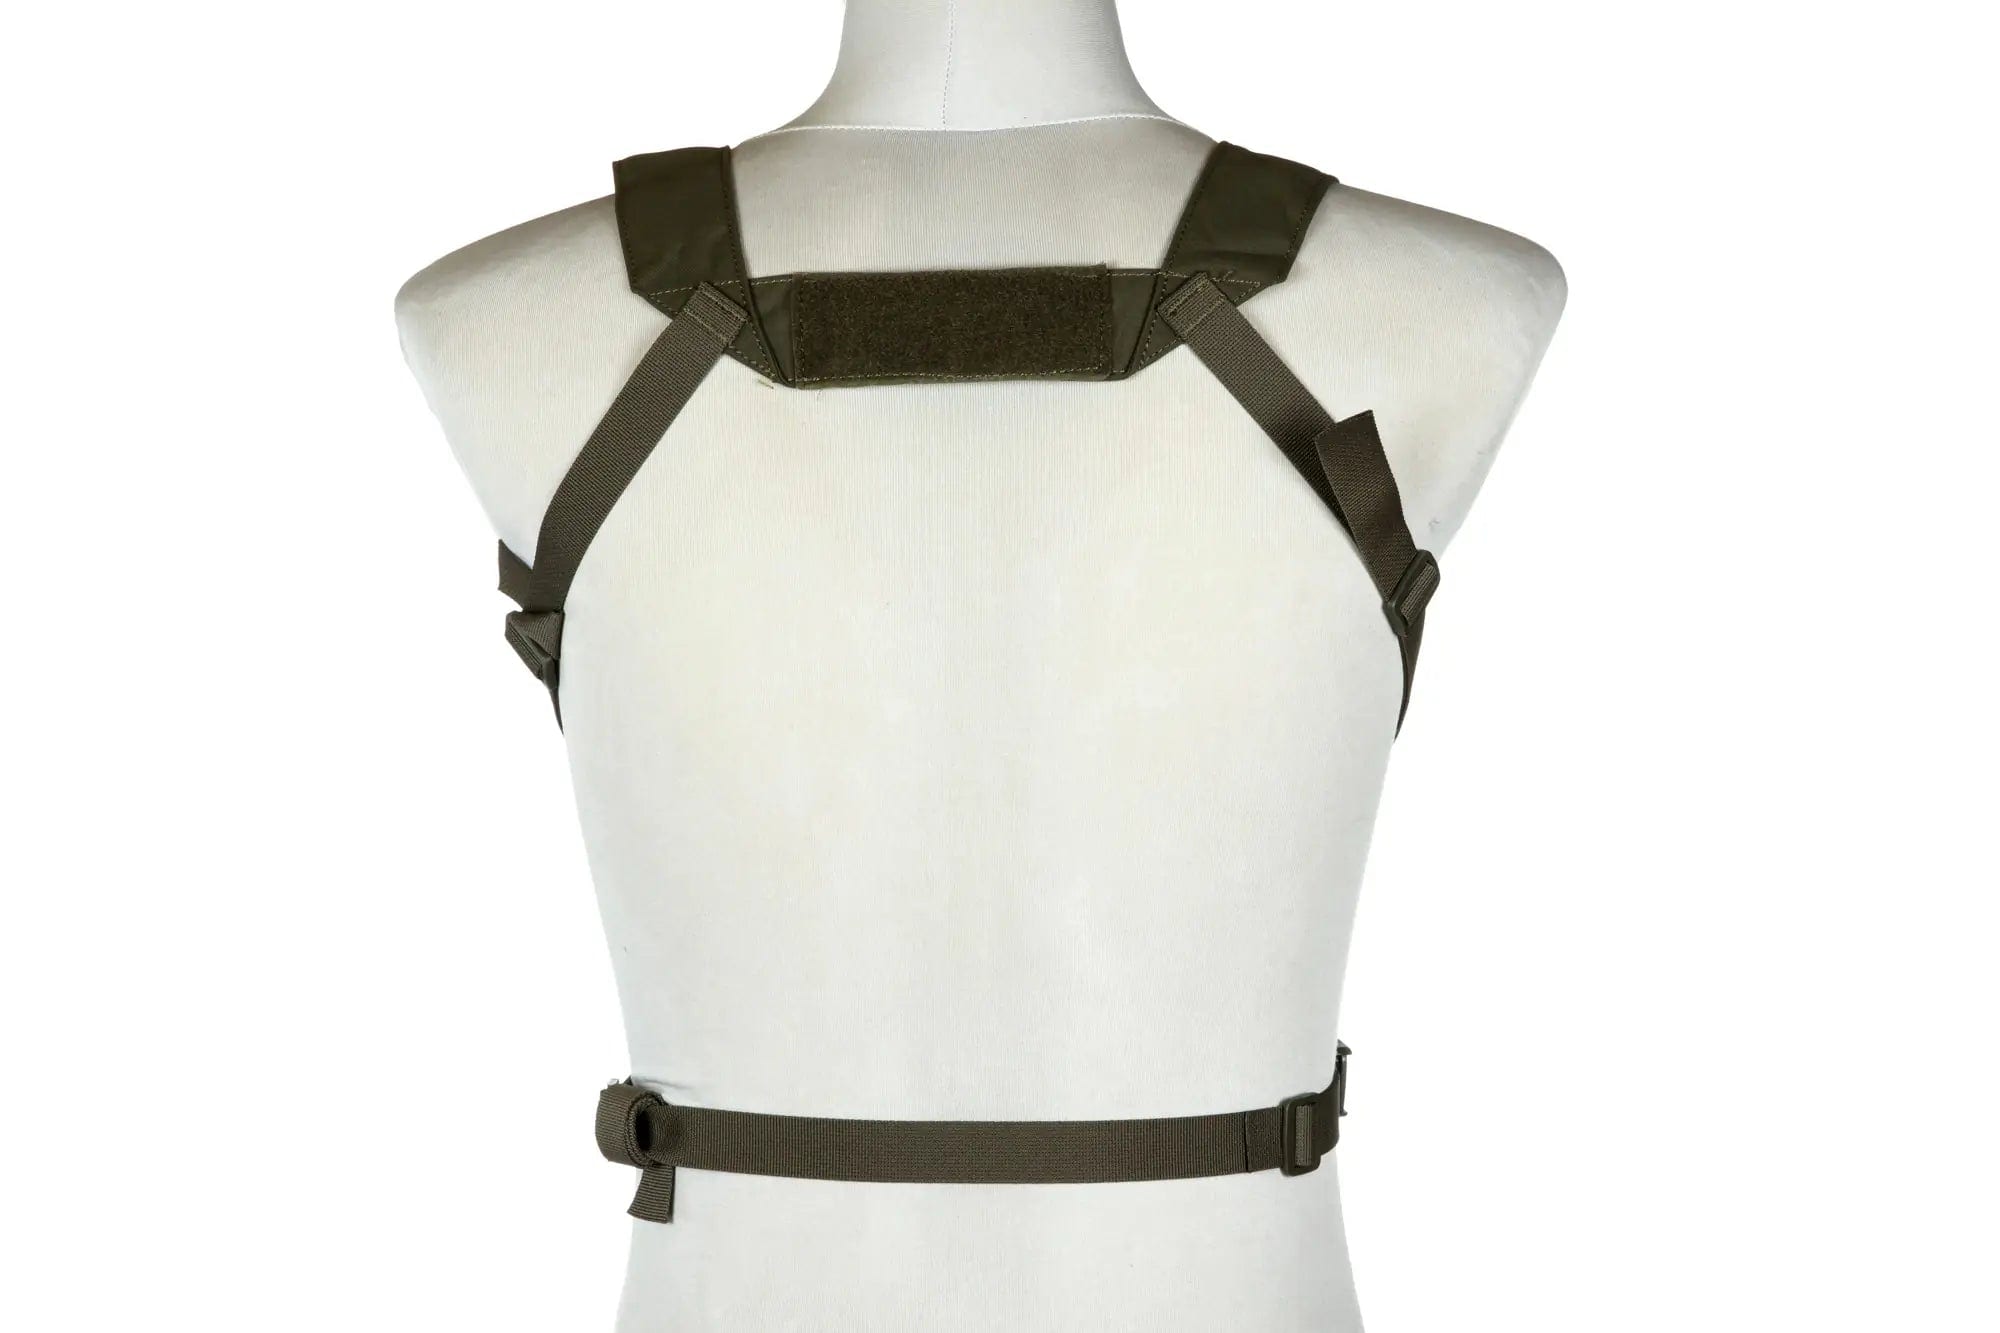 Tactical Chest Rig MK3 Type Sonyks - Ranger Green